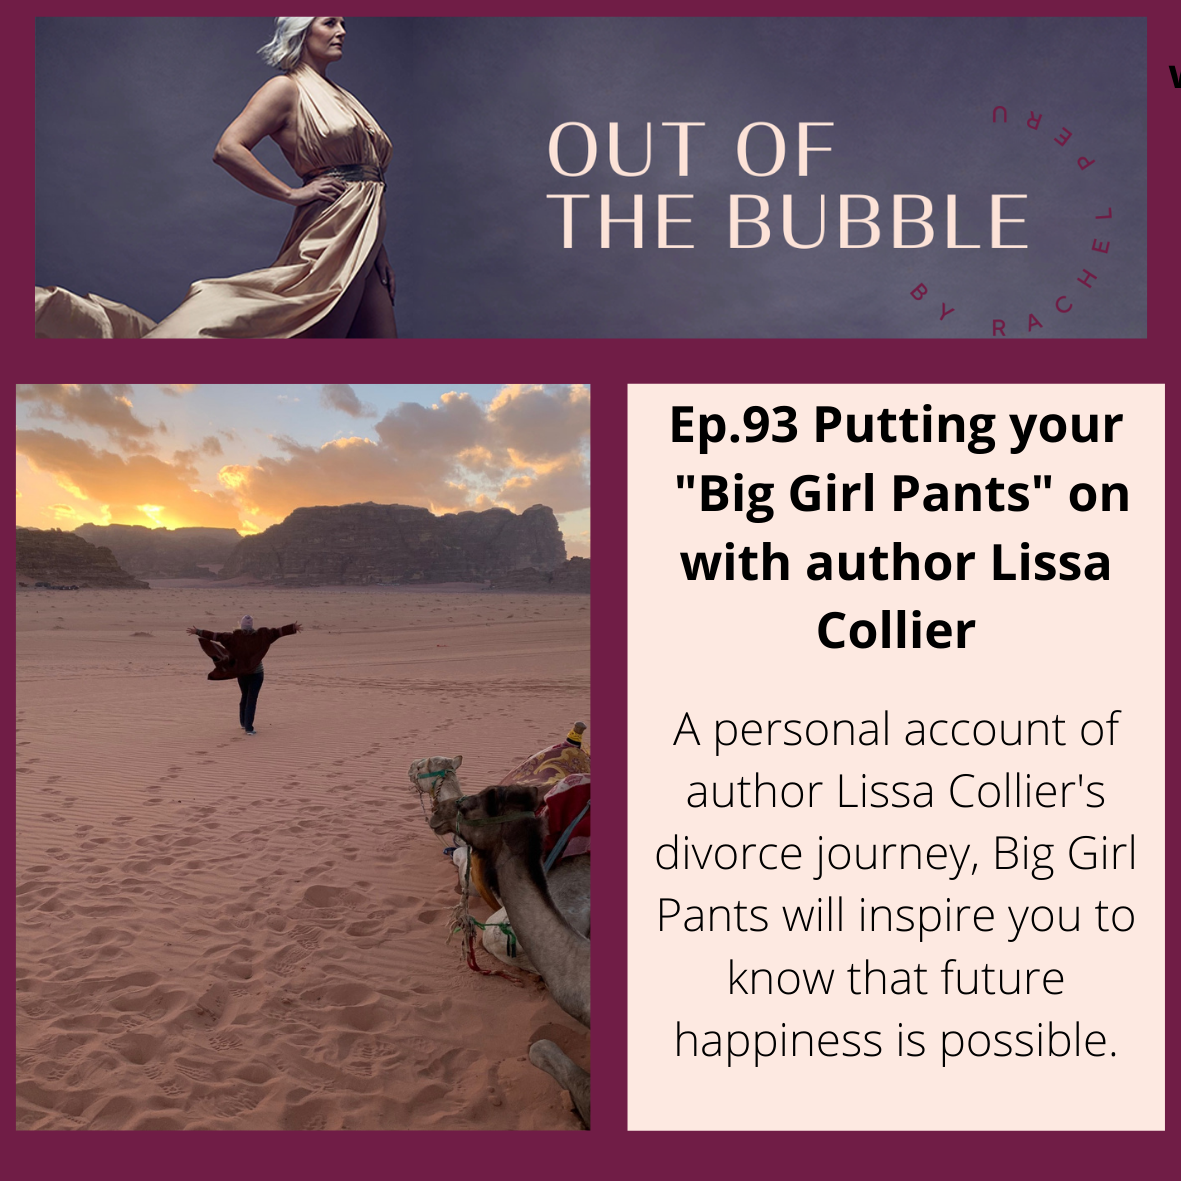 Ep.93 Liberte Free to Be with Author Lisa Collier, Putting your 'Big Girl Pants' though-divorceon Through Divorce.